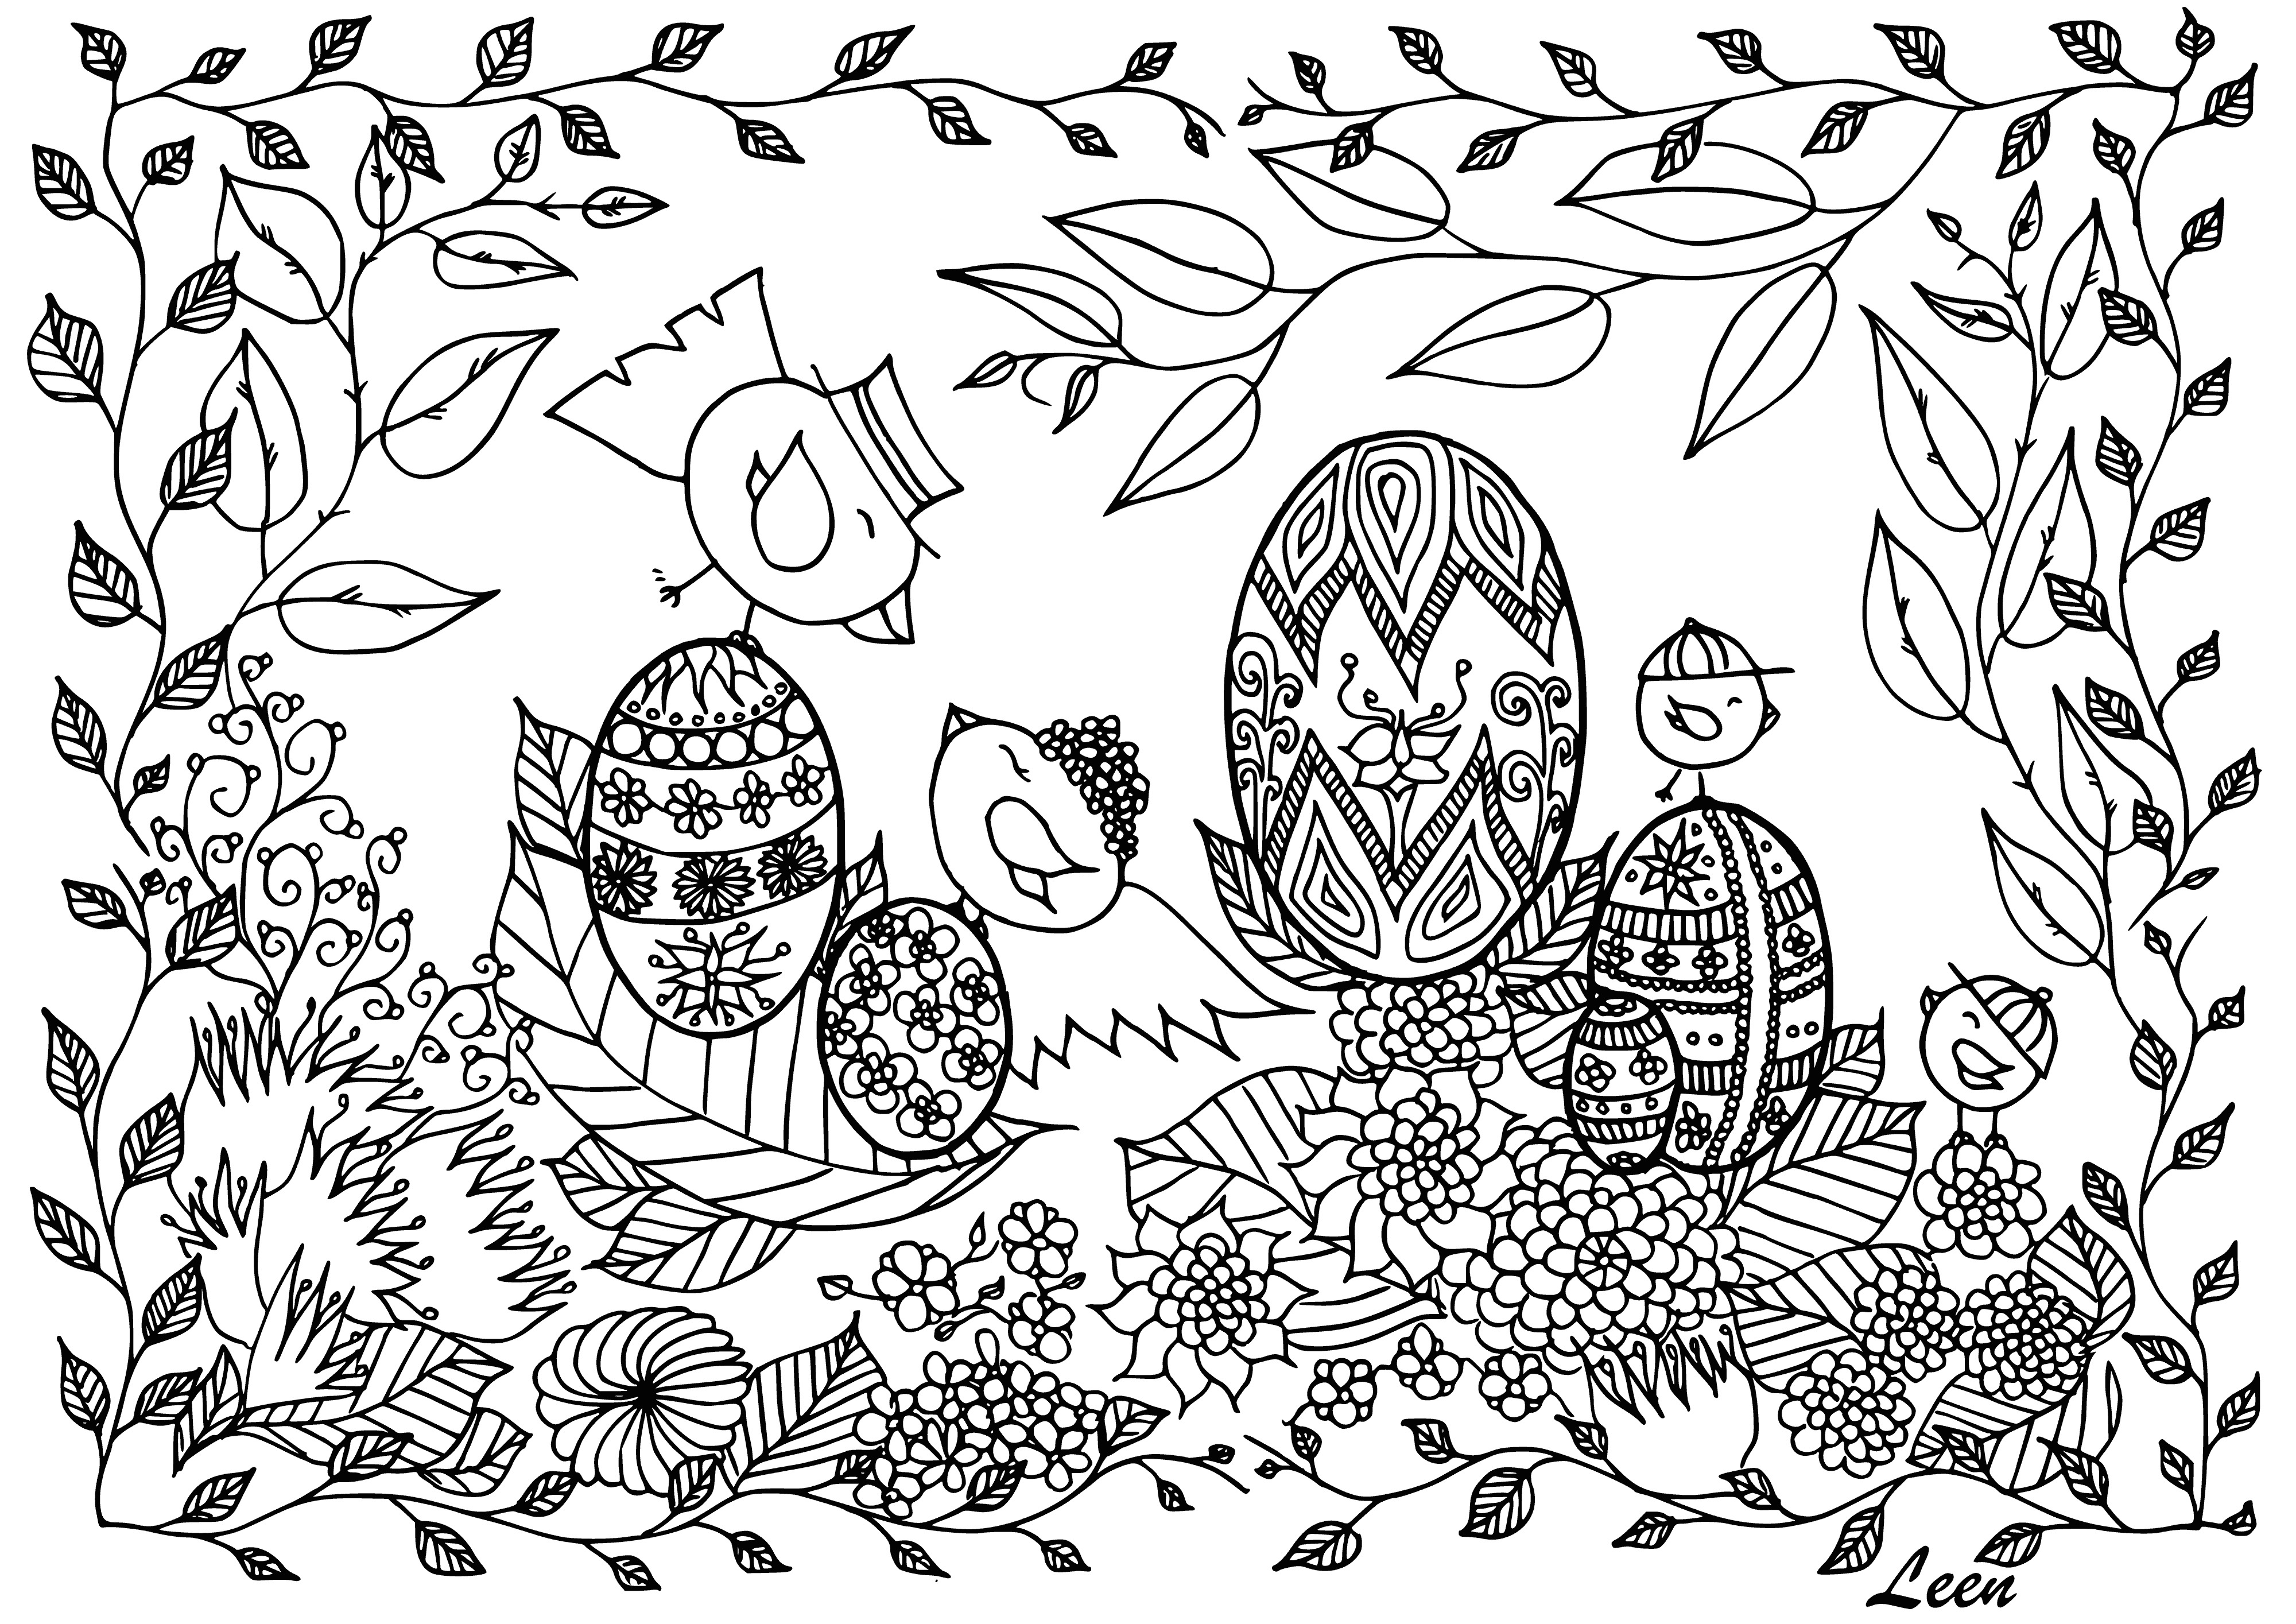 coloring page: 4 Easter-themed coloring pages - Easter basket, bunny w/ egg, chick hatching & lamb. Enjoy! #EasterFun